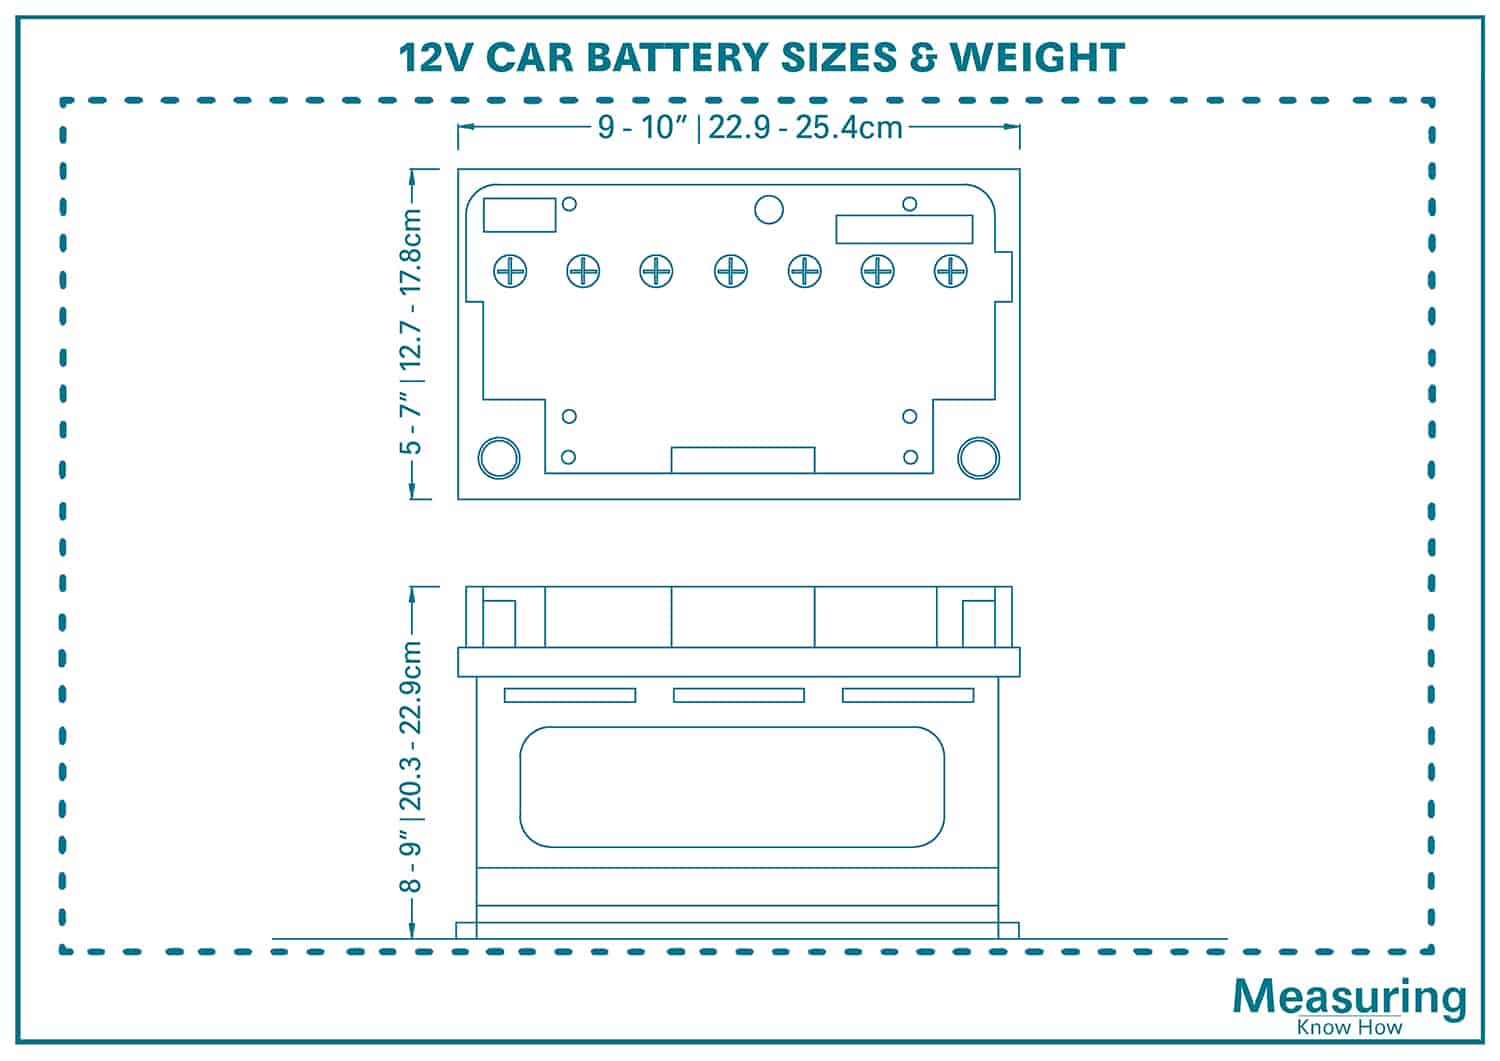 12v Car Battery Sizes and Weight